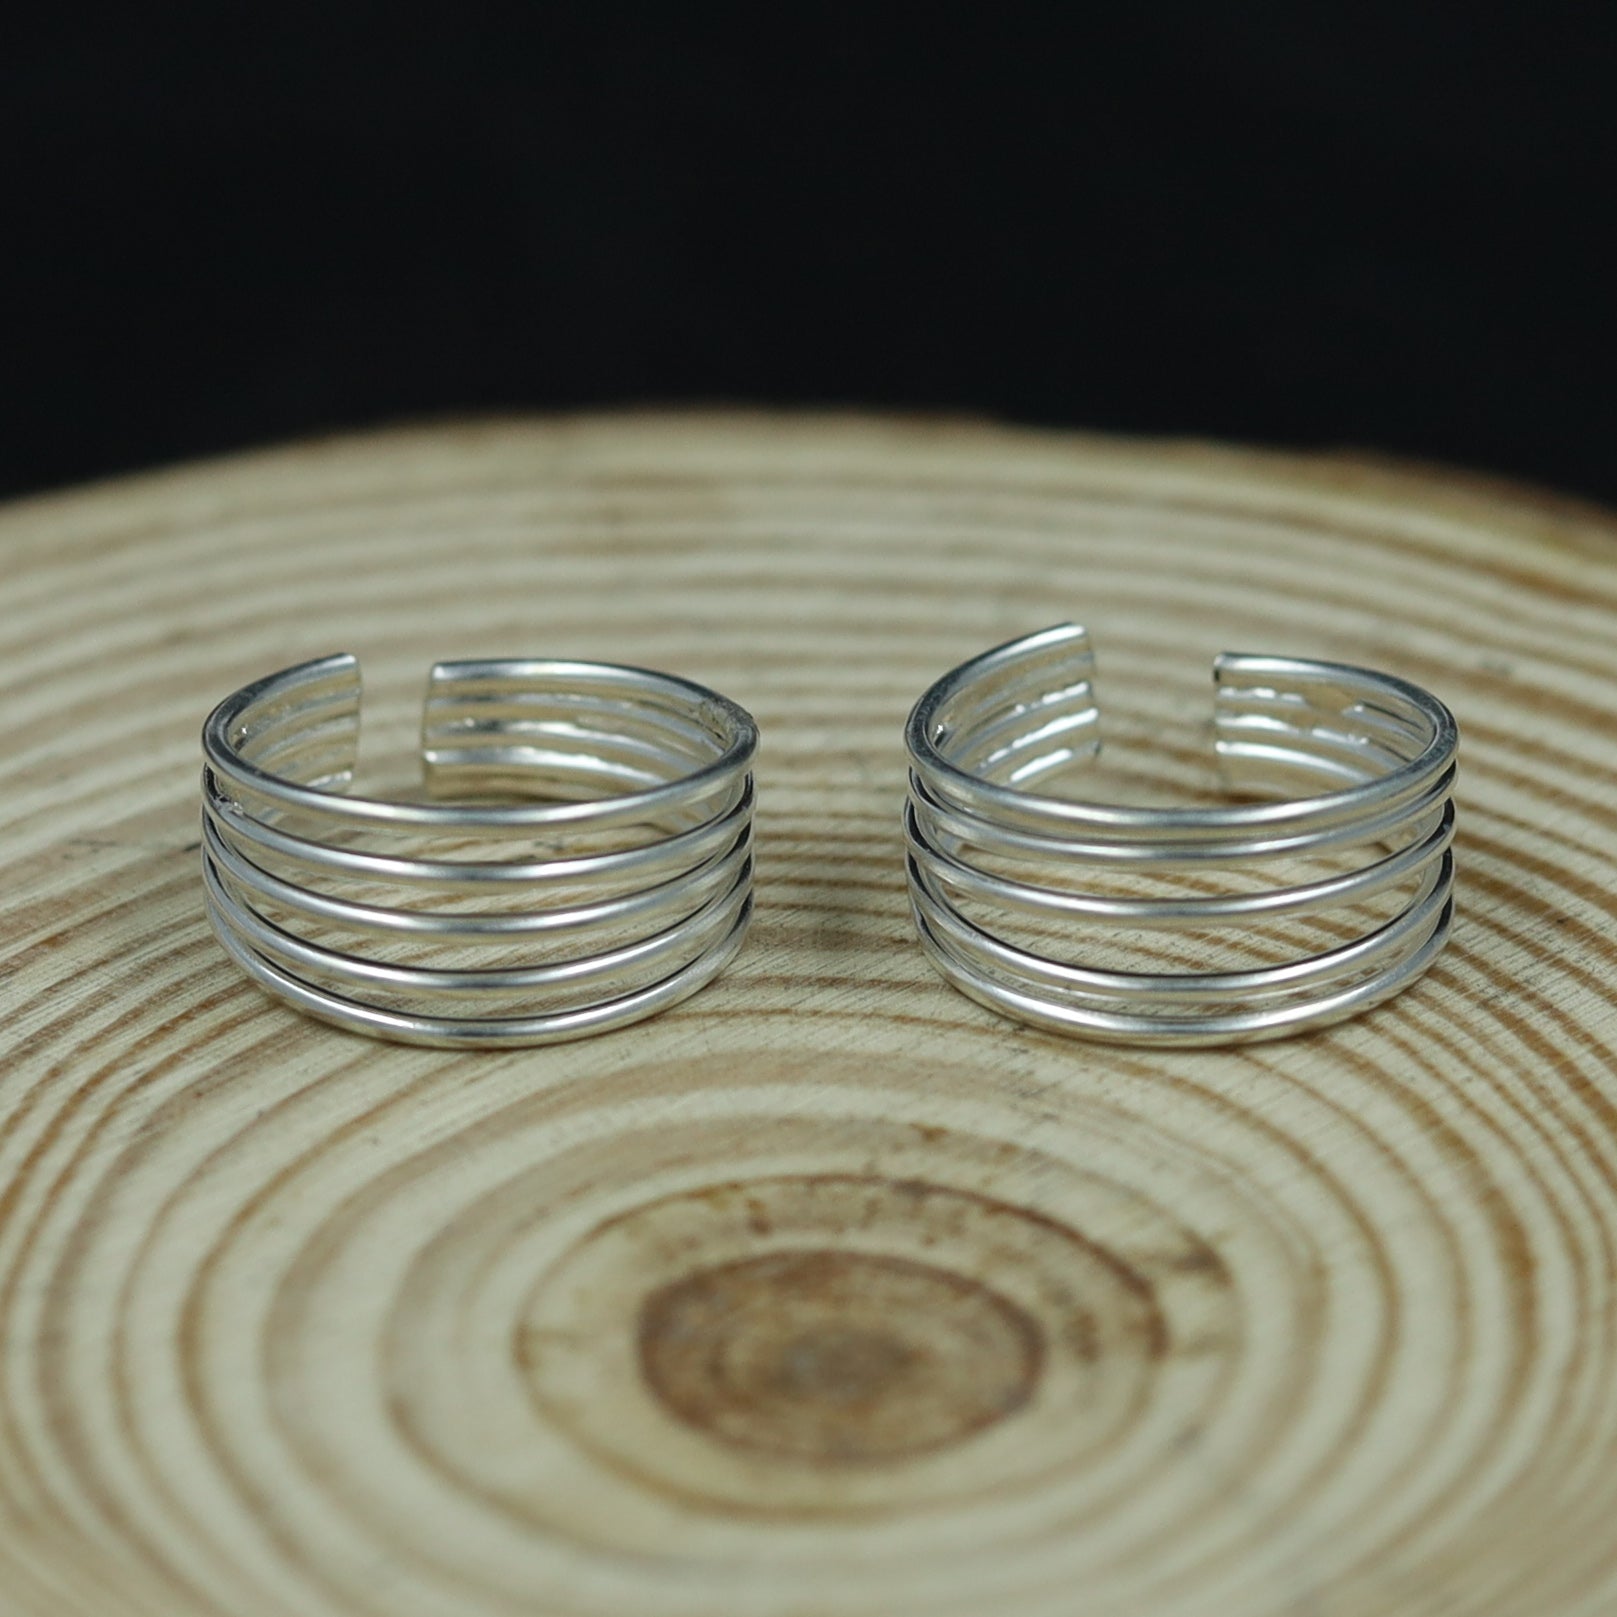 Buy Silver Handcrafted Toe Ring | ARST95/ARDI14NOV | The loom